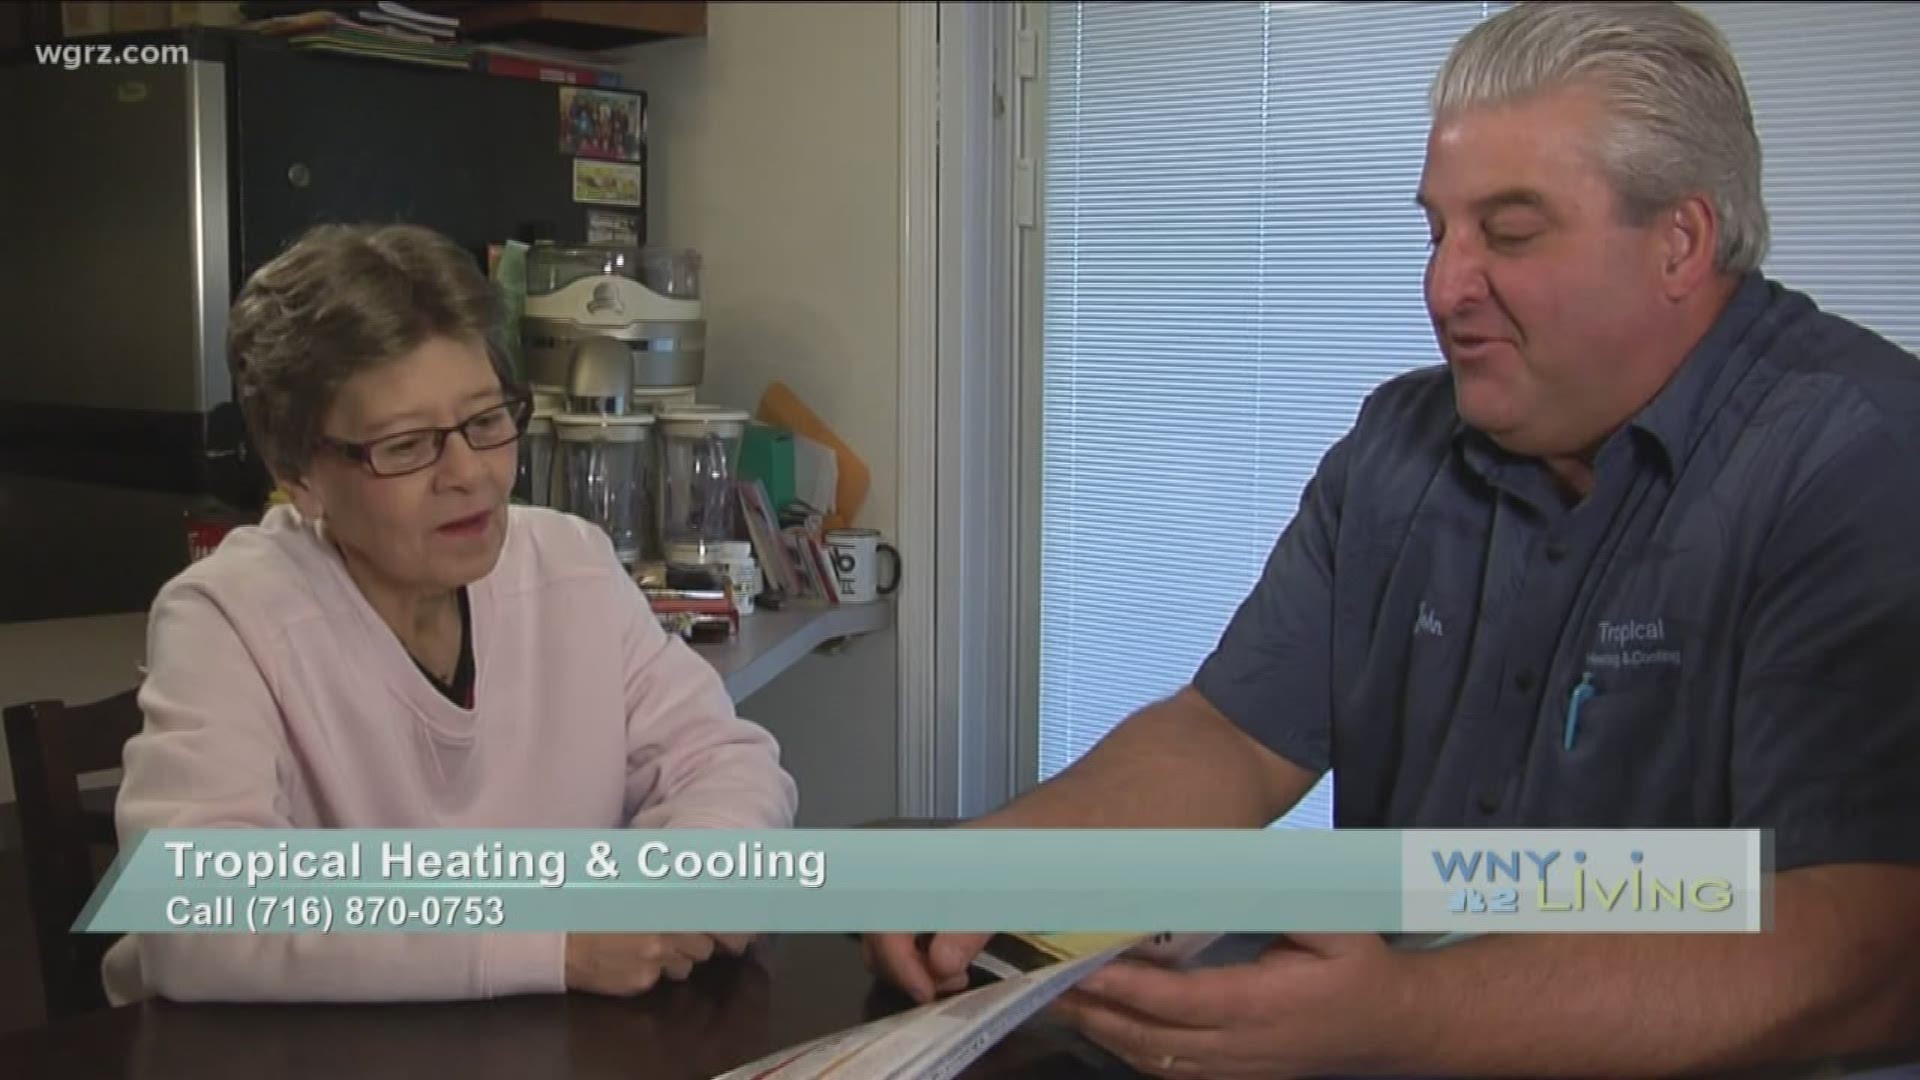 February 1 - Tropical Heating & Cooling (THIS VIDEO IS SPONSORED BY TROPICAL HEATING & COOLING)